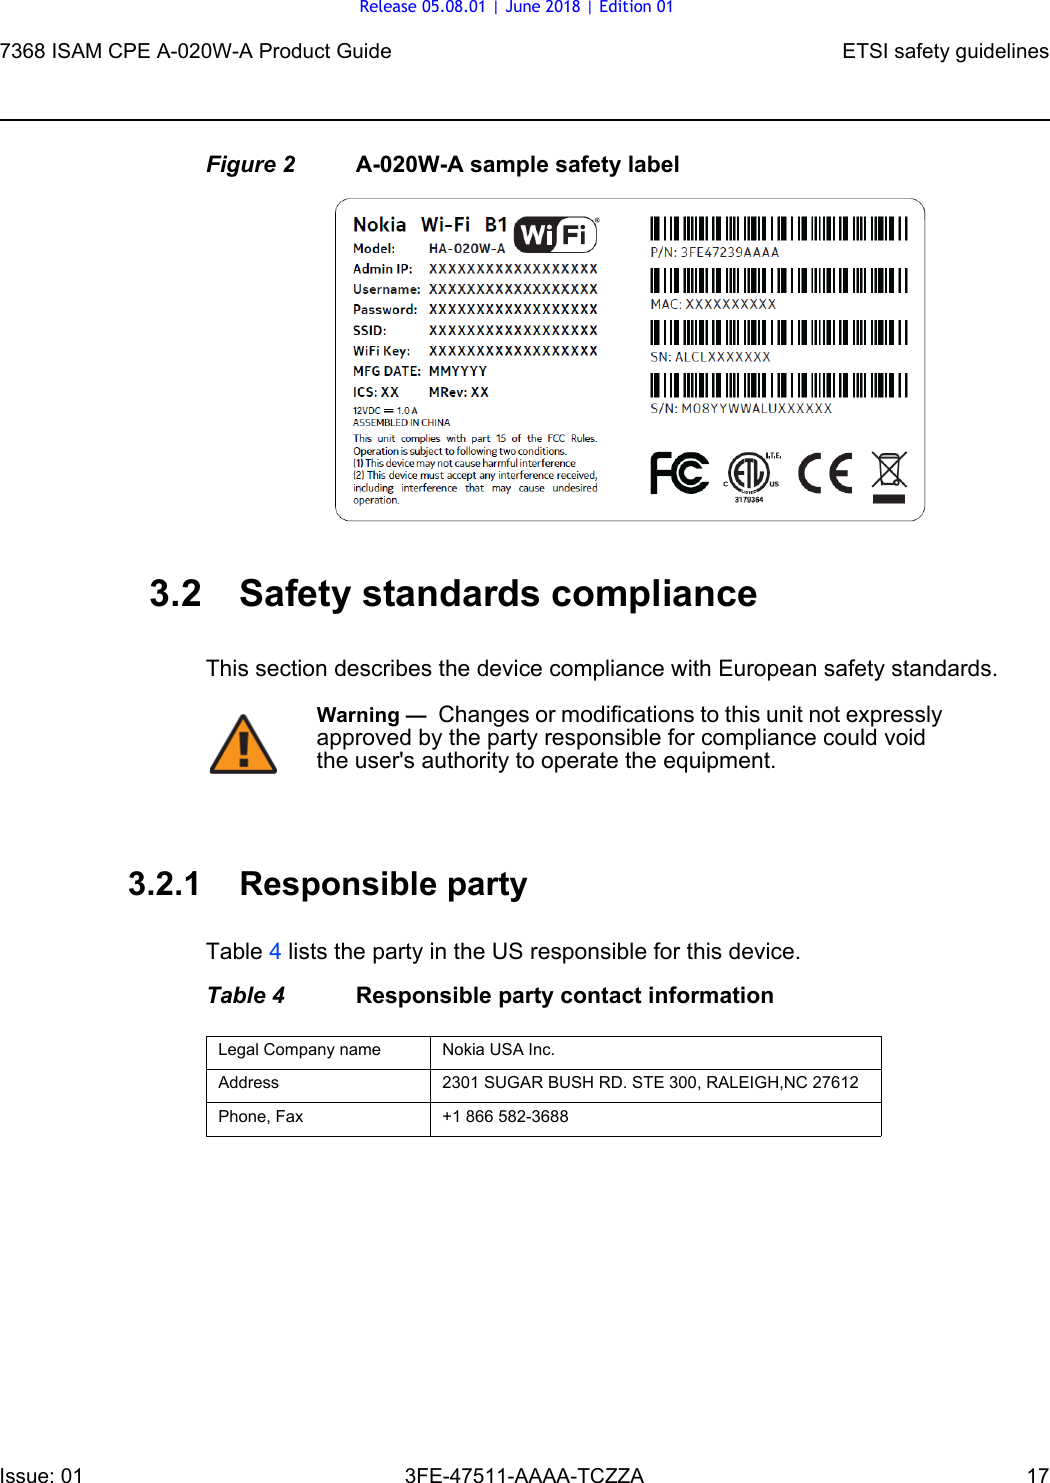 7368 ISAM CPE A-020W-A Product Guide ETSI safety guidelinesIssue: 01 3FE-47511-AAAA-TCZZA 17 Figure 2 A-020W-A sample safety label3.2 Safety standards complianceThis section describes the device compliance with European safety standards.3.2.1 Responsible partyTable 4 lists the party in the US responsible for this device.Table 4 Responsible party contact informationWarning —  Changes or modifications to this unit not expressly approved by the party responsible for compliance could void the user&apos;s authority to operate the equipment.Legal Company name Nokia USA Inc.Address 2301 SUGAR BUSH RD. STE 300, RALEIGH,NC 27612Phone, Fax +1 866 582-3688Release 05.08.01 | June 2018 | Edition 01